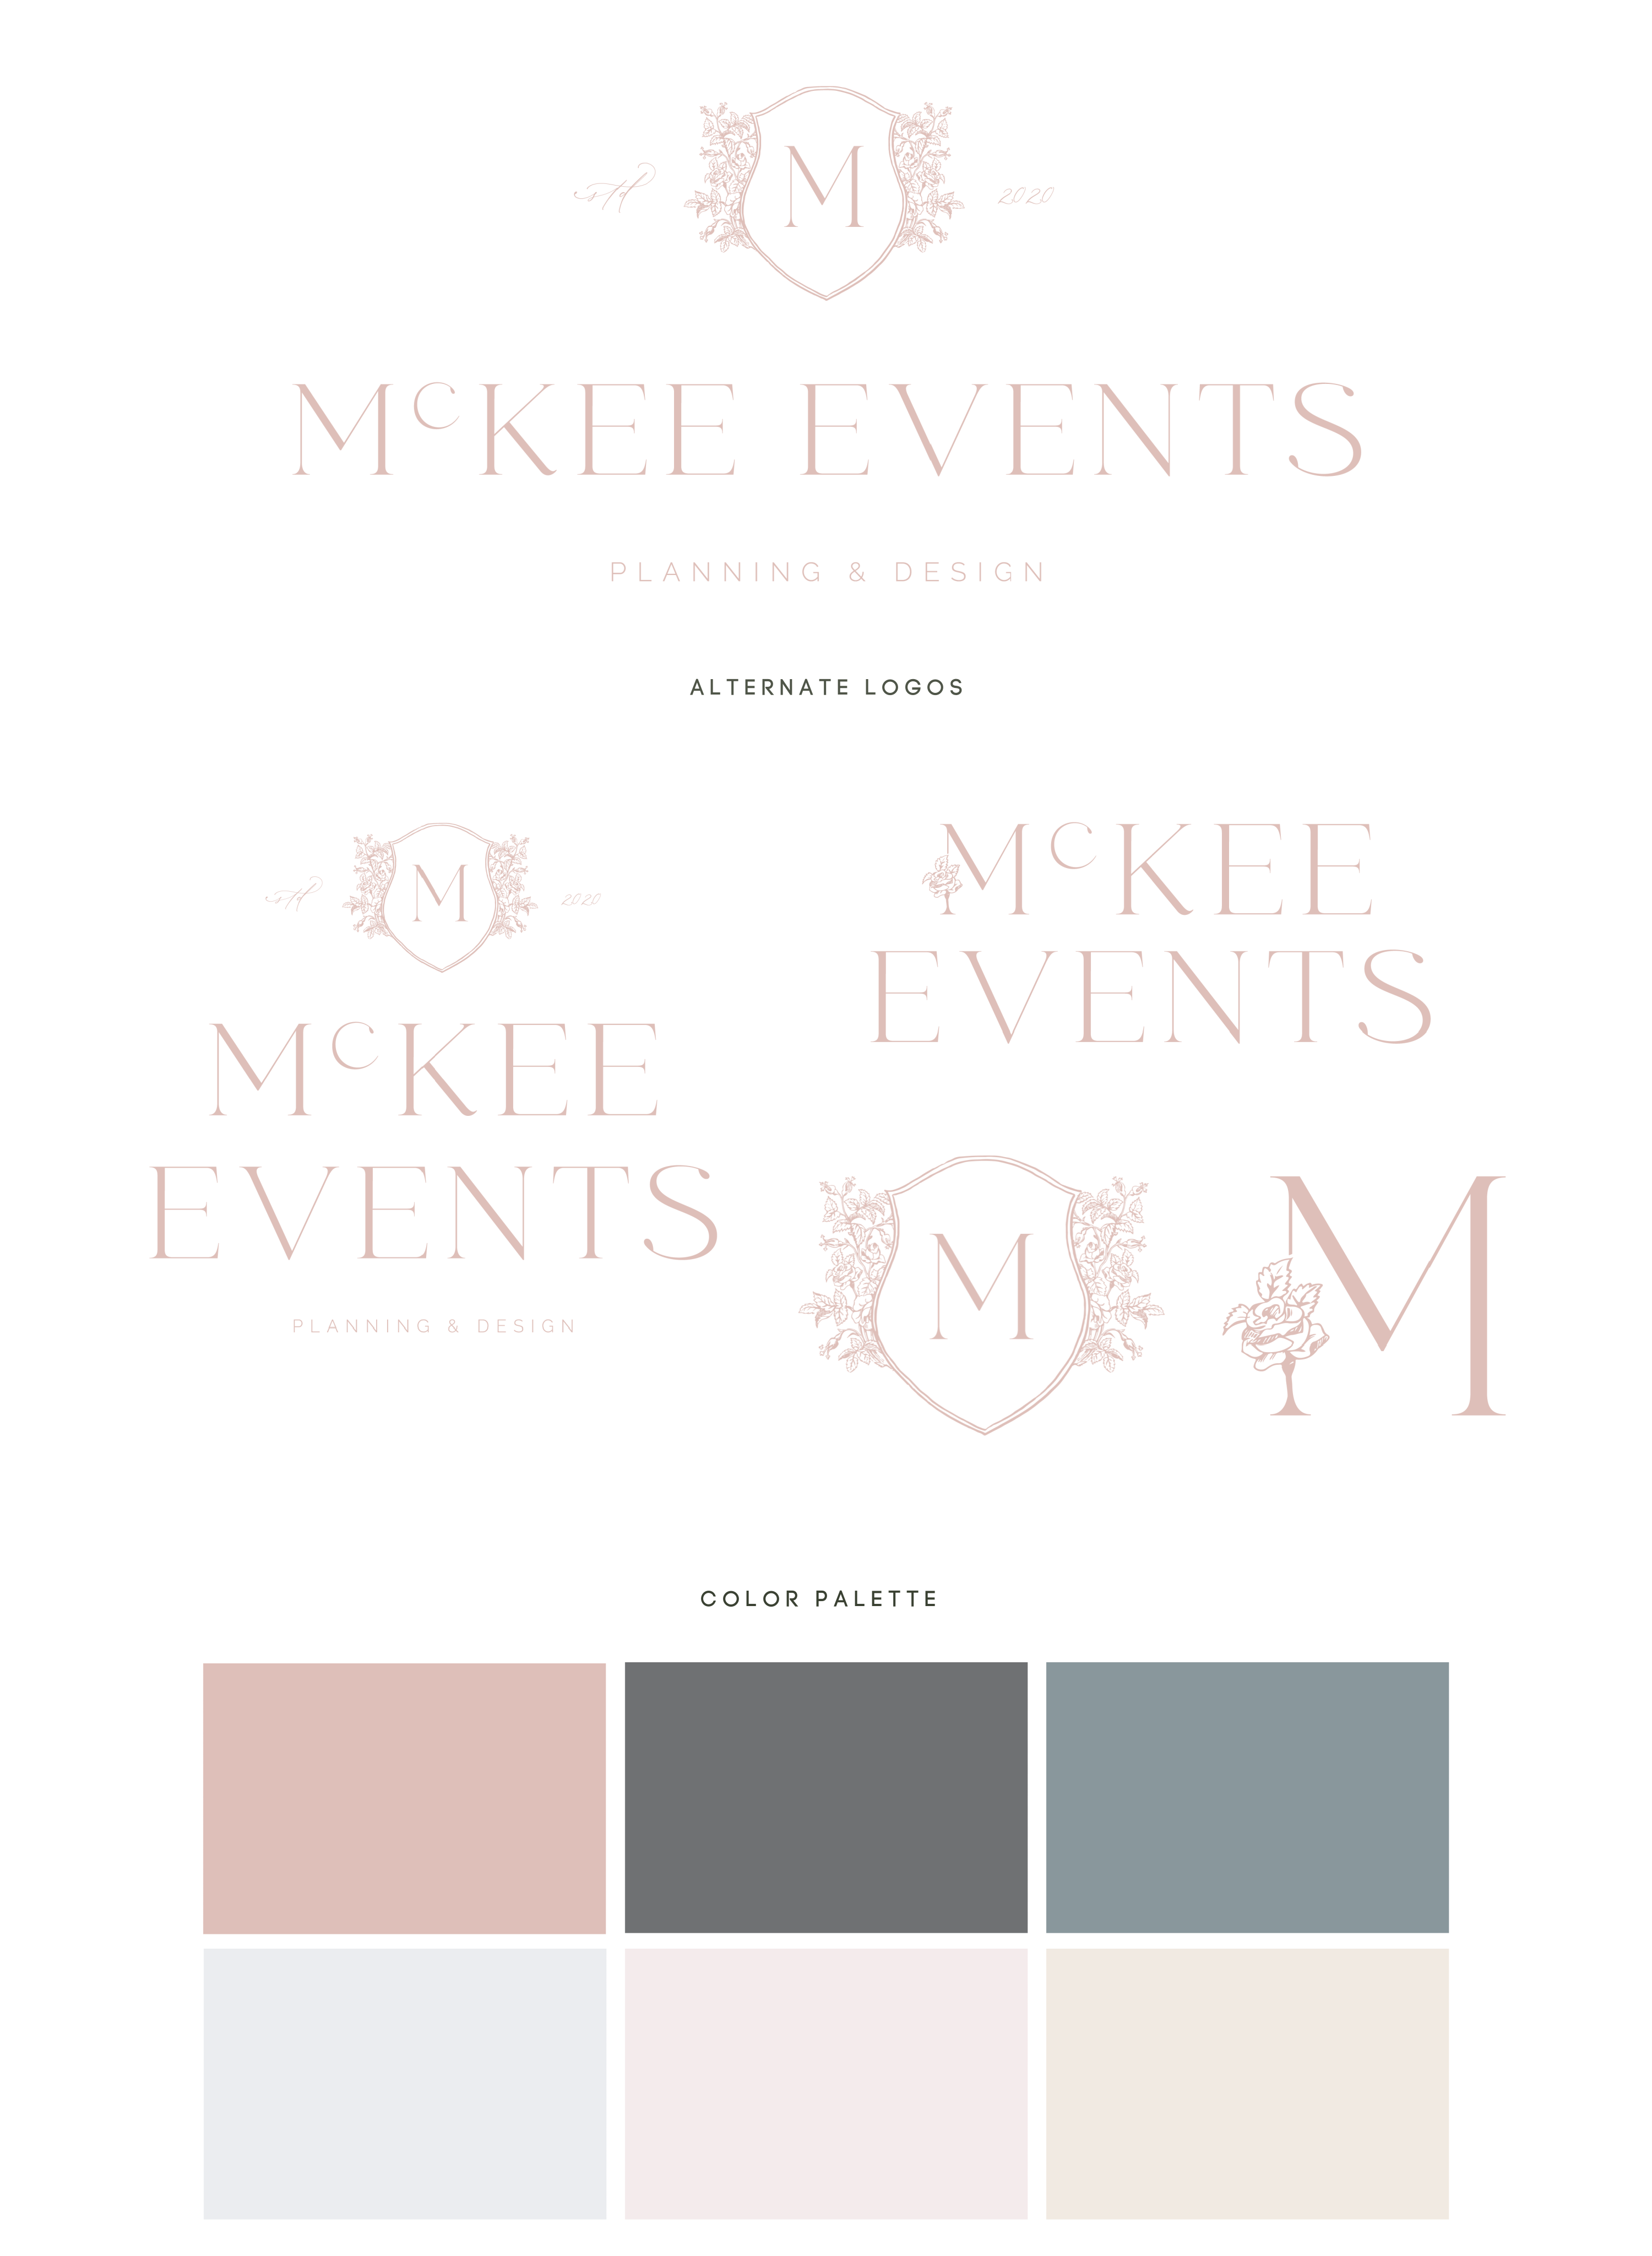 Logos and color palette for McKee Events, a luxury southeast wedding planner. Brand and showit design.